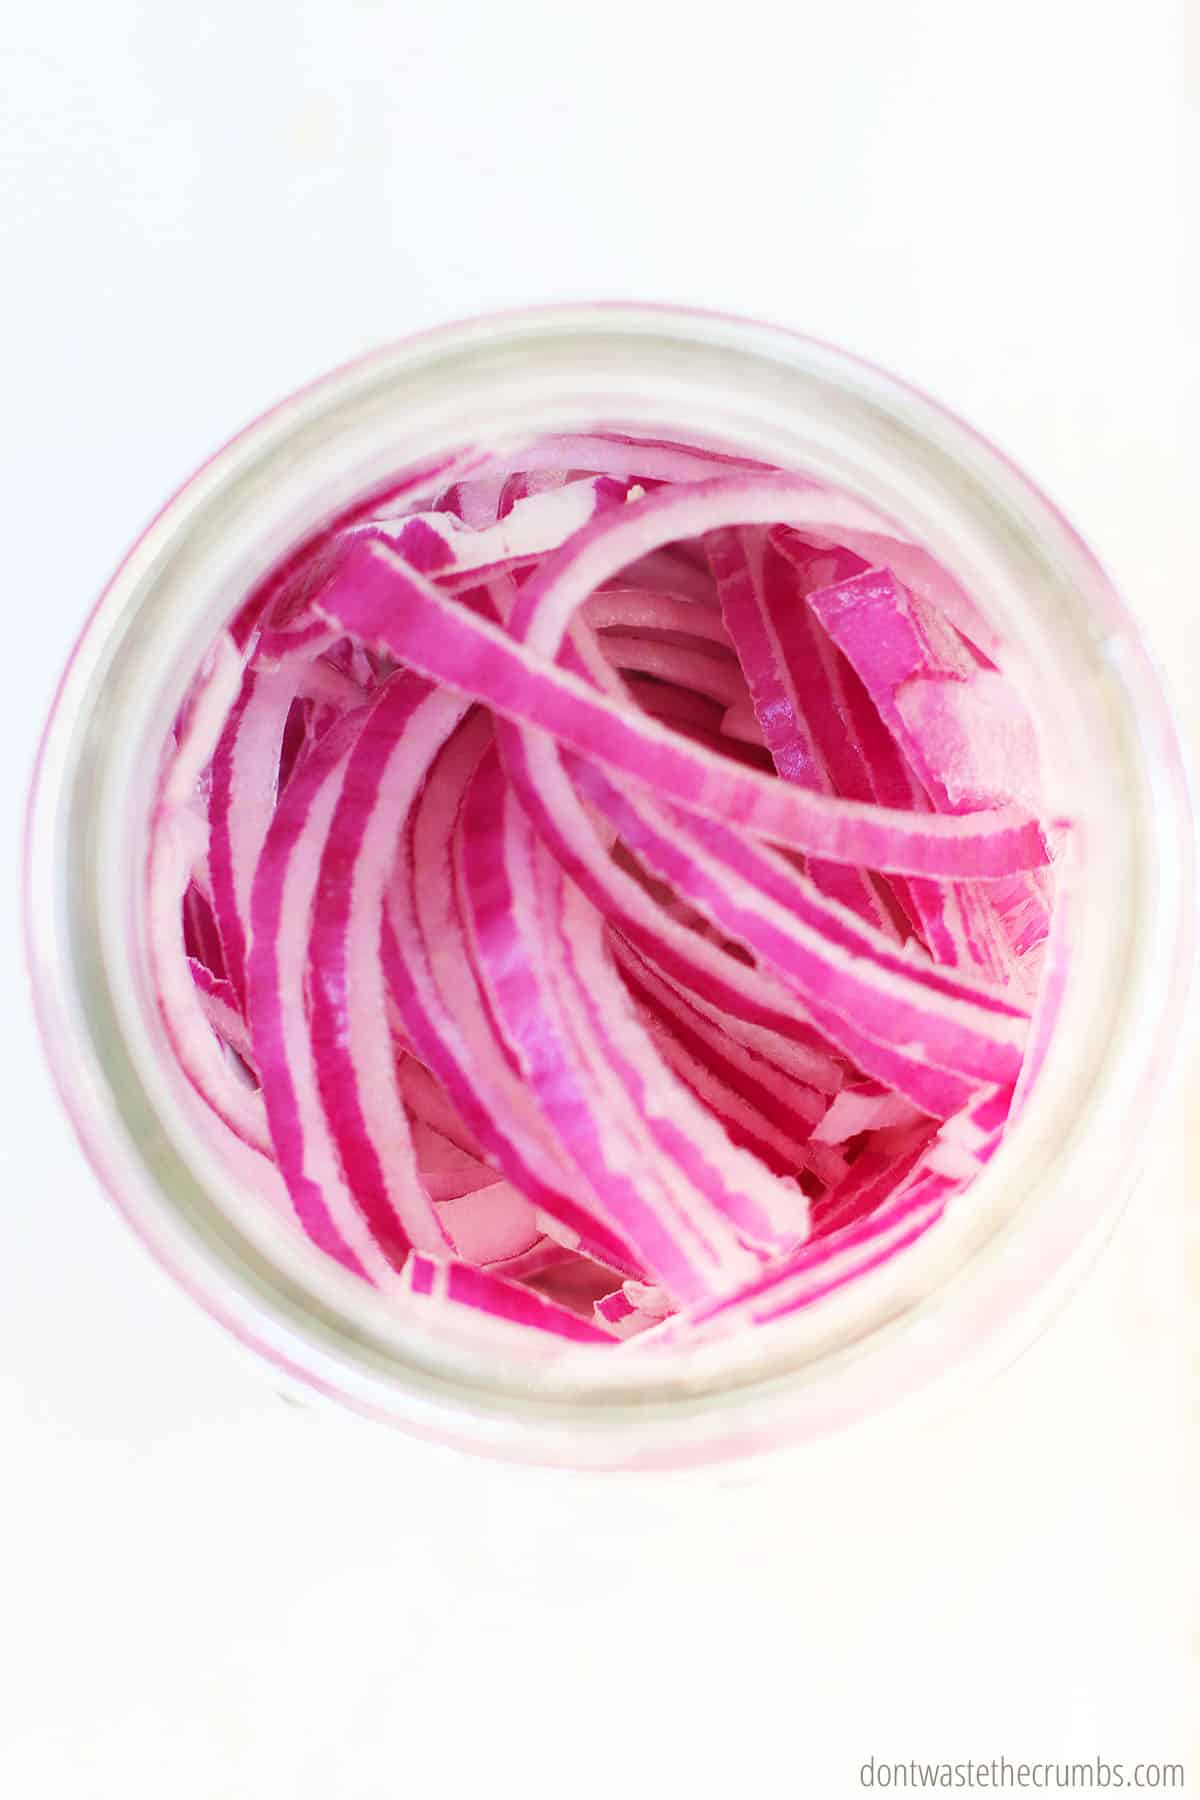 Freshly sliced red onions in a clear glass jar ready to be picked.